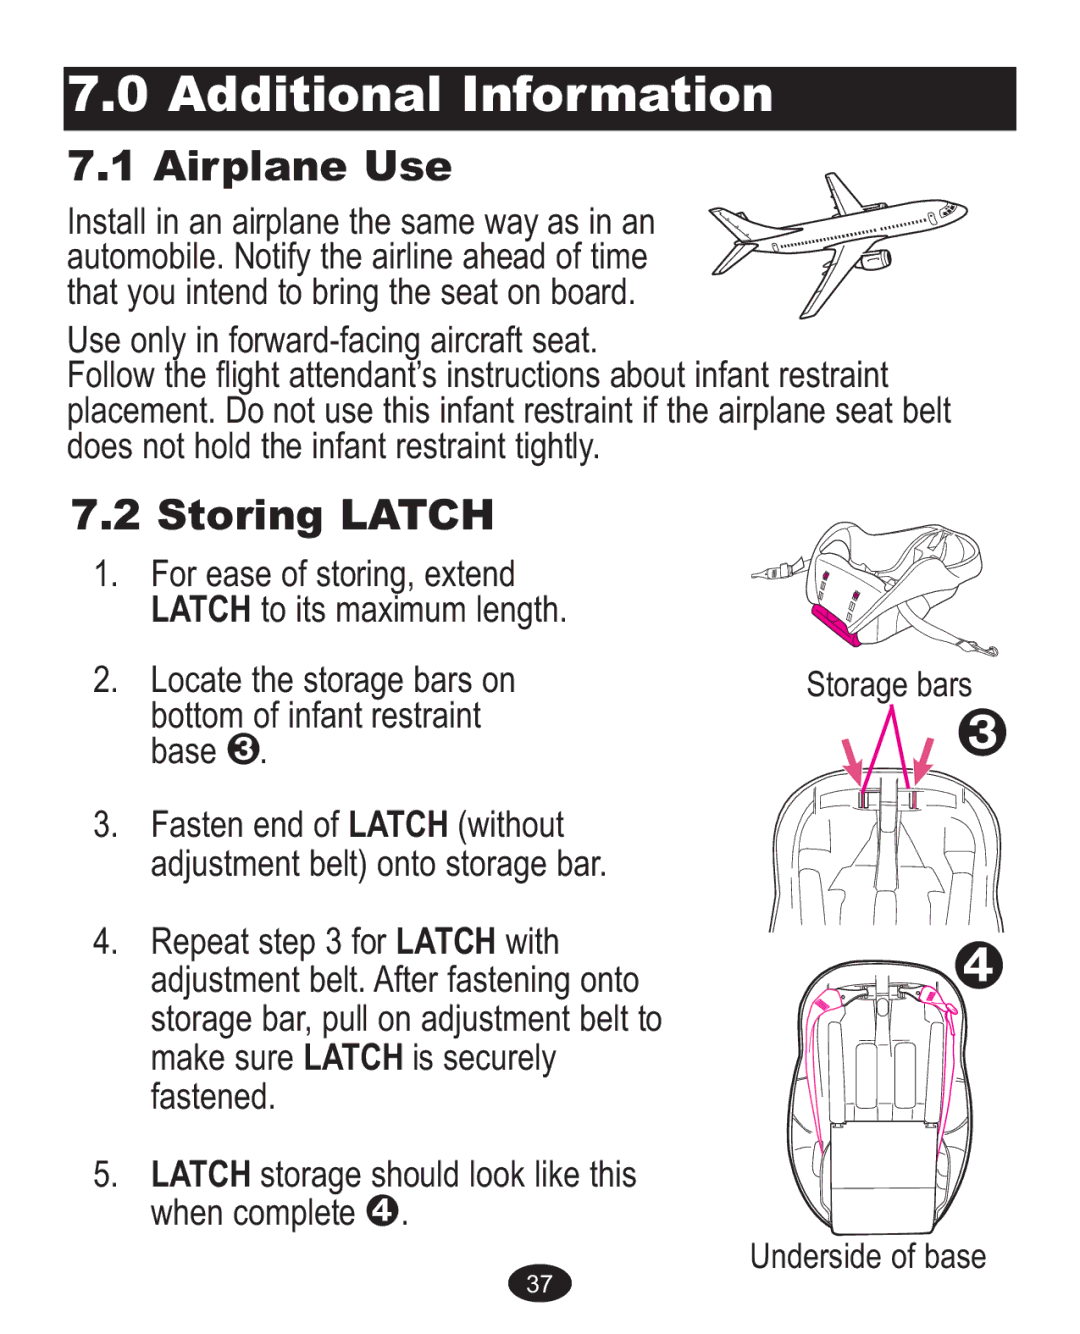 Graco 1770580, 1773134, 1760973, 1762155 owner manual Additional Information, Airplane Use, Storing Latch 